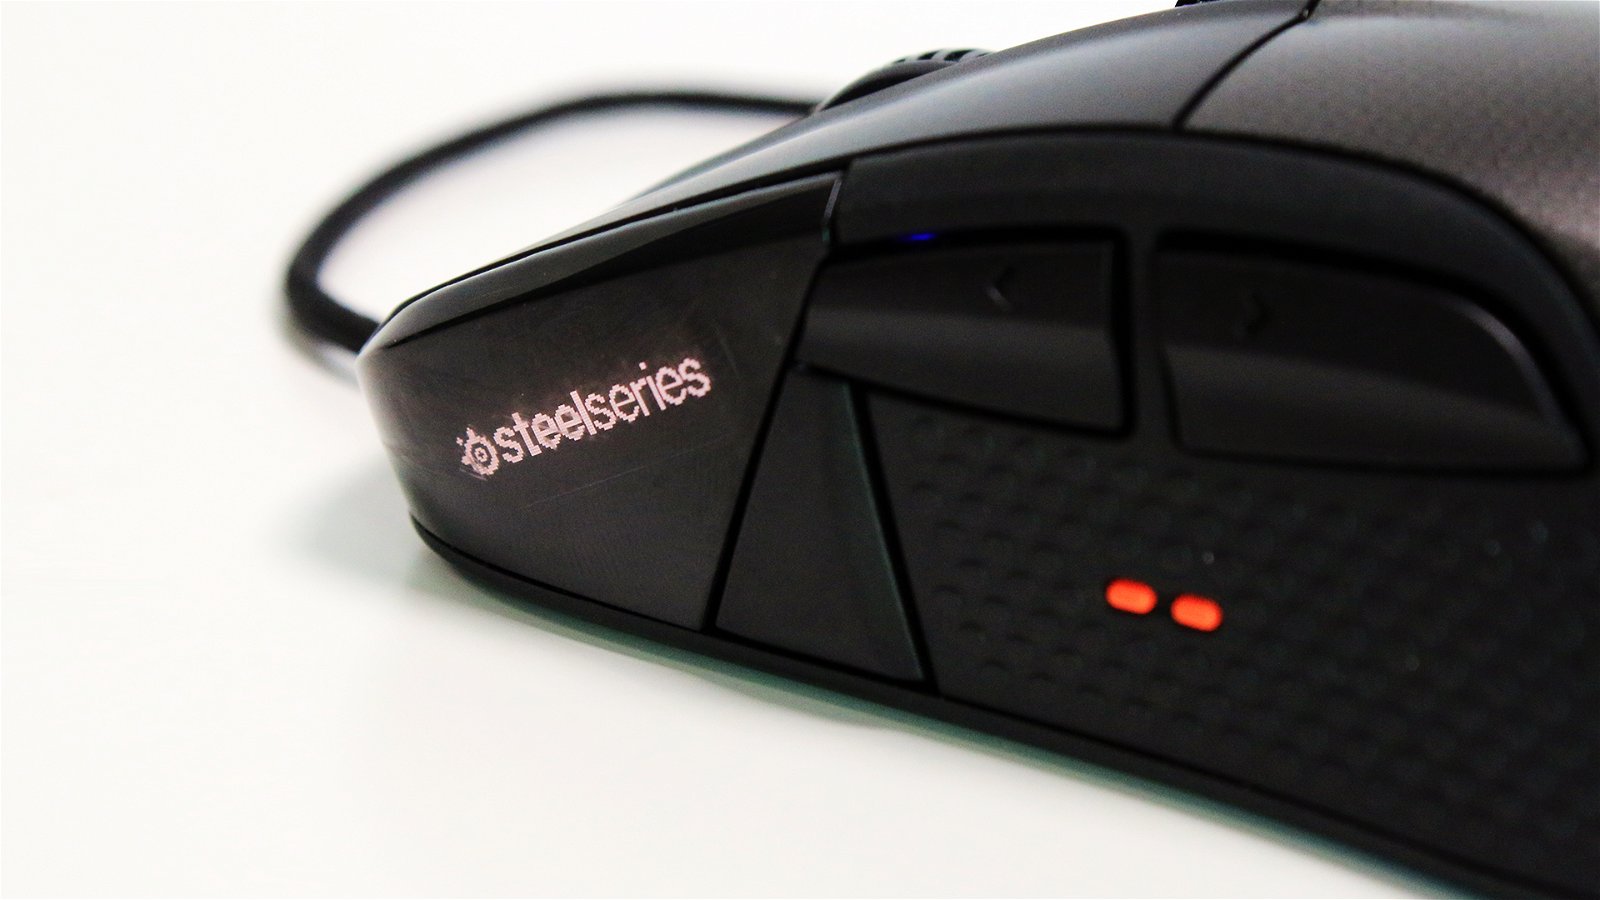 Steelseries Rival 700 Mouse (Hardware) Review 11